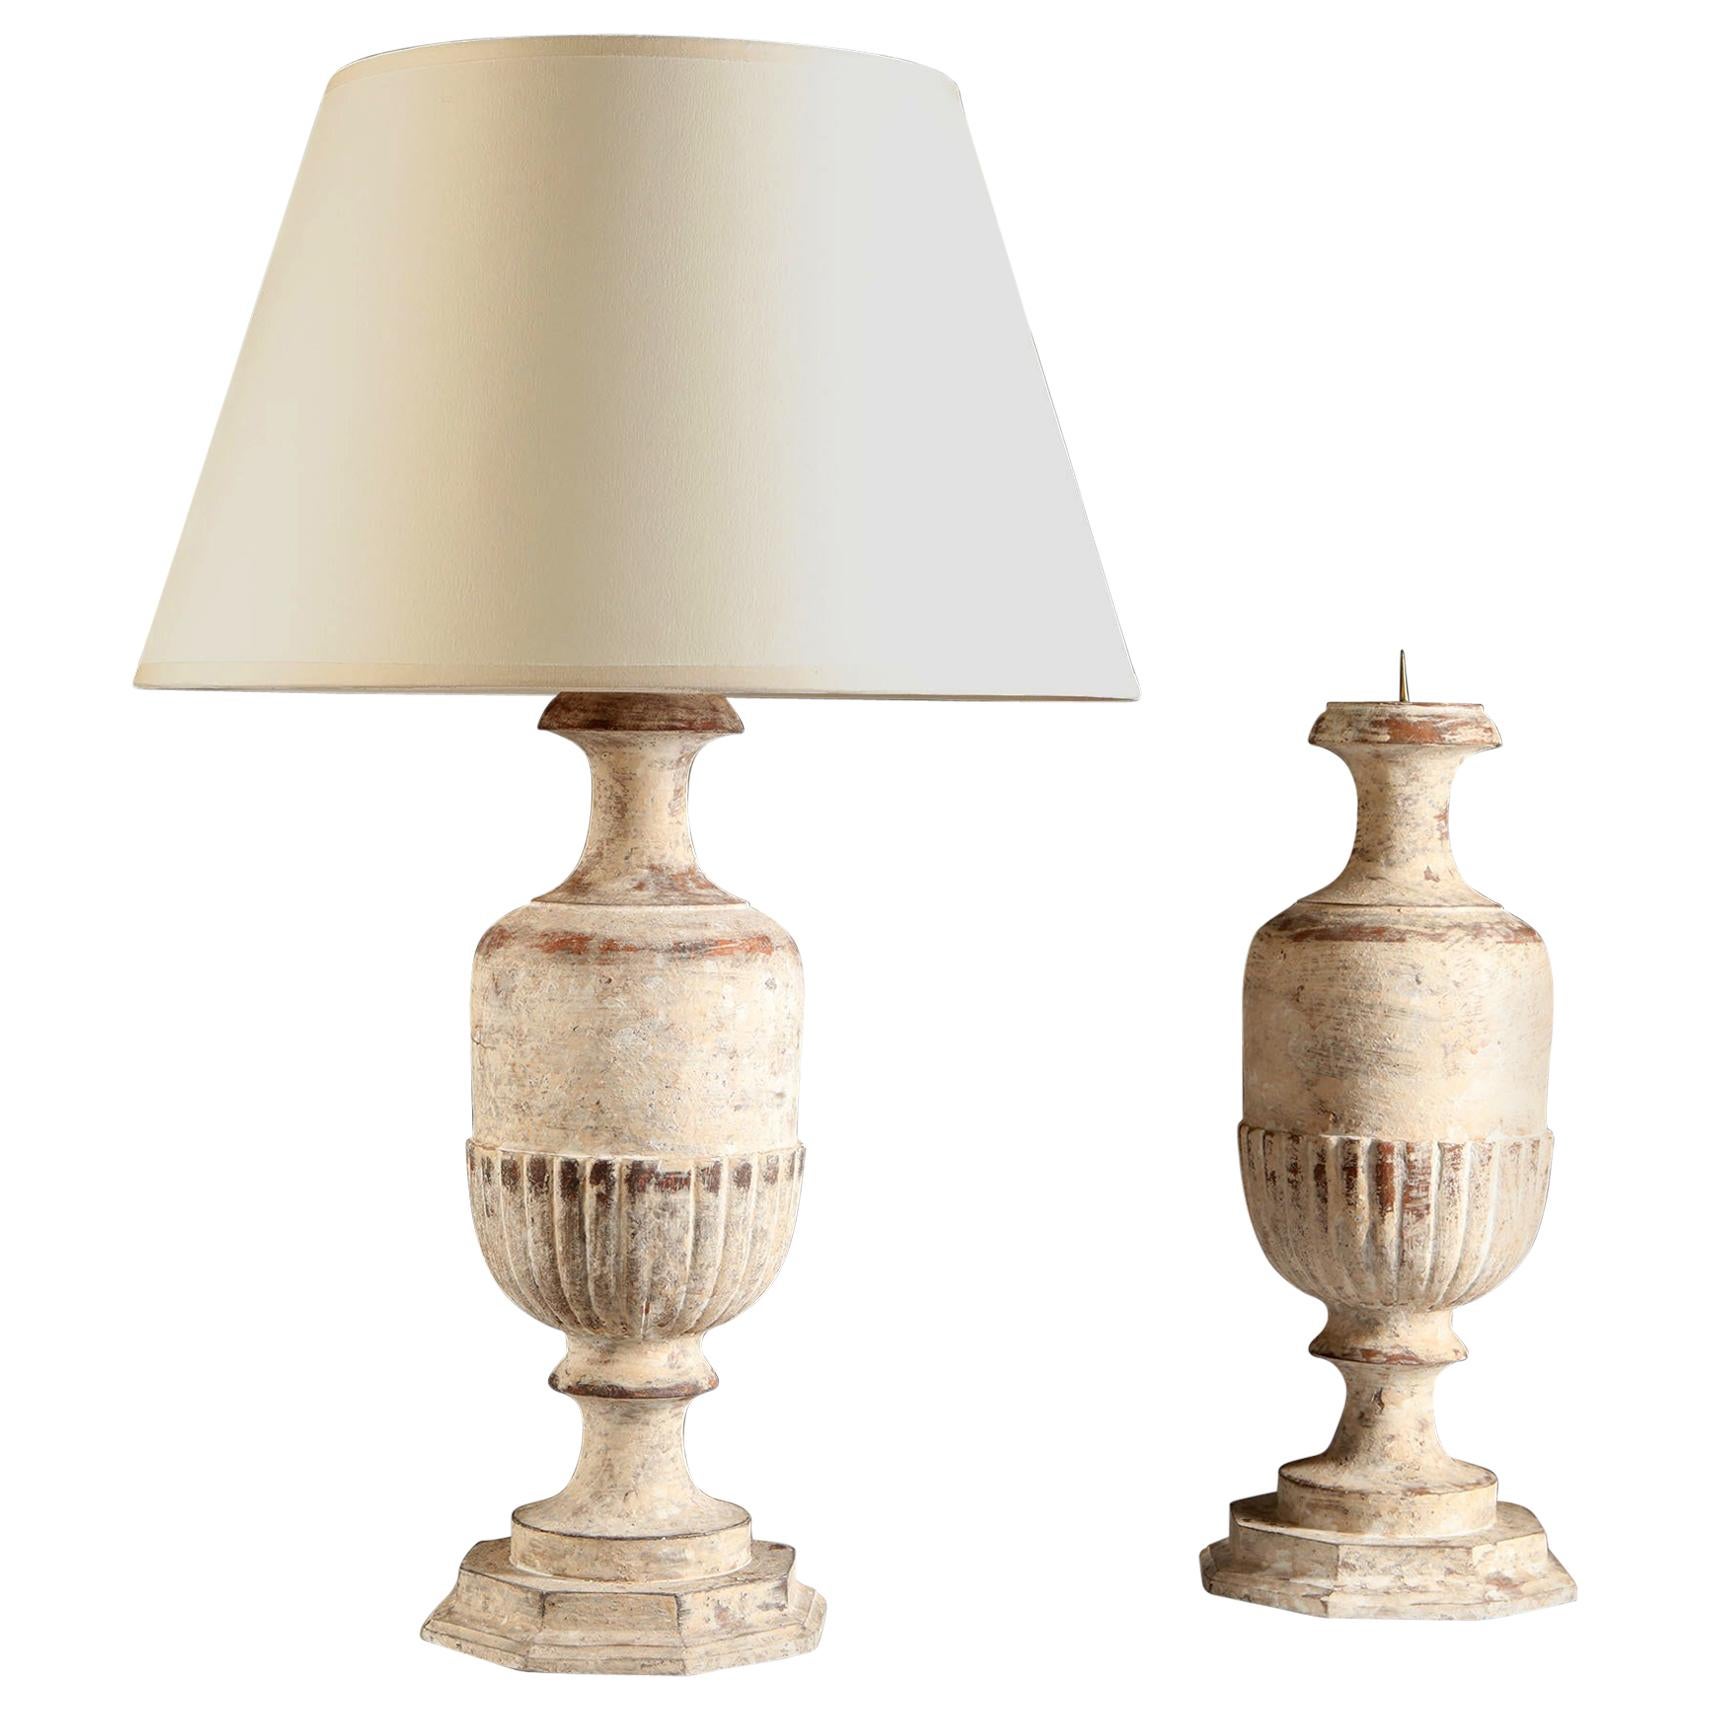 Pair of White Gesso Painted Metal Lamps